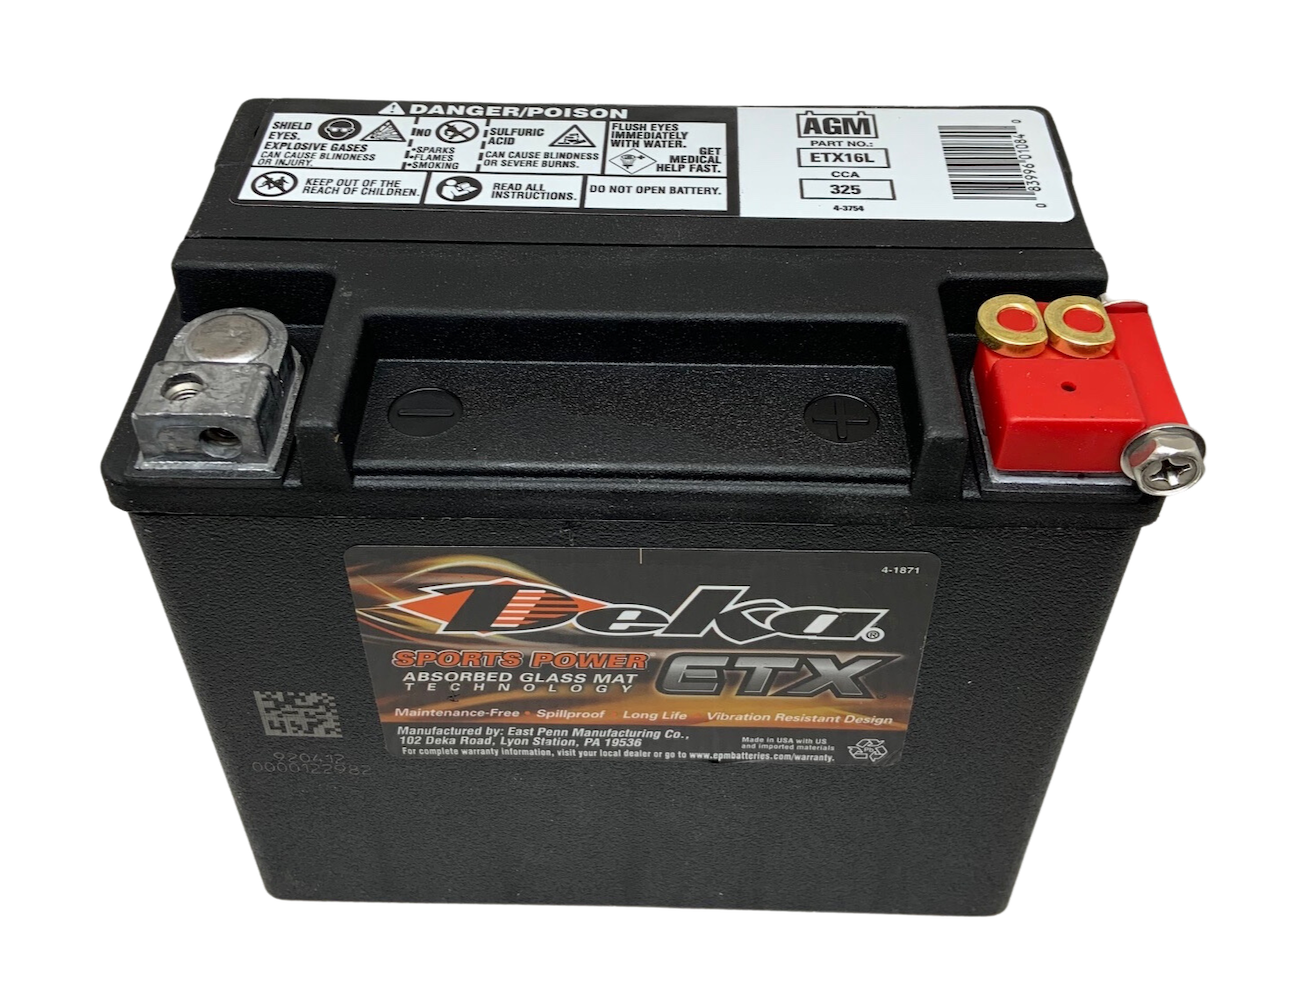 What is the manufacturer date on the Deka ETX16L batteries